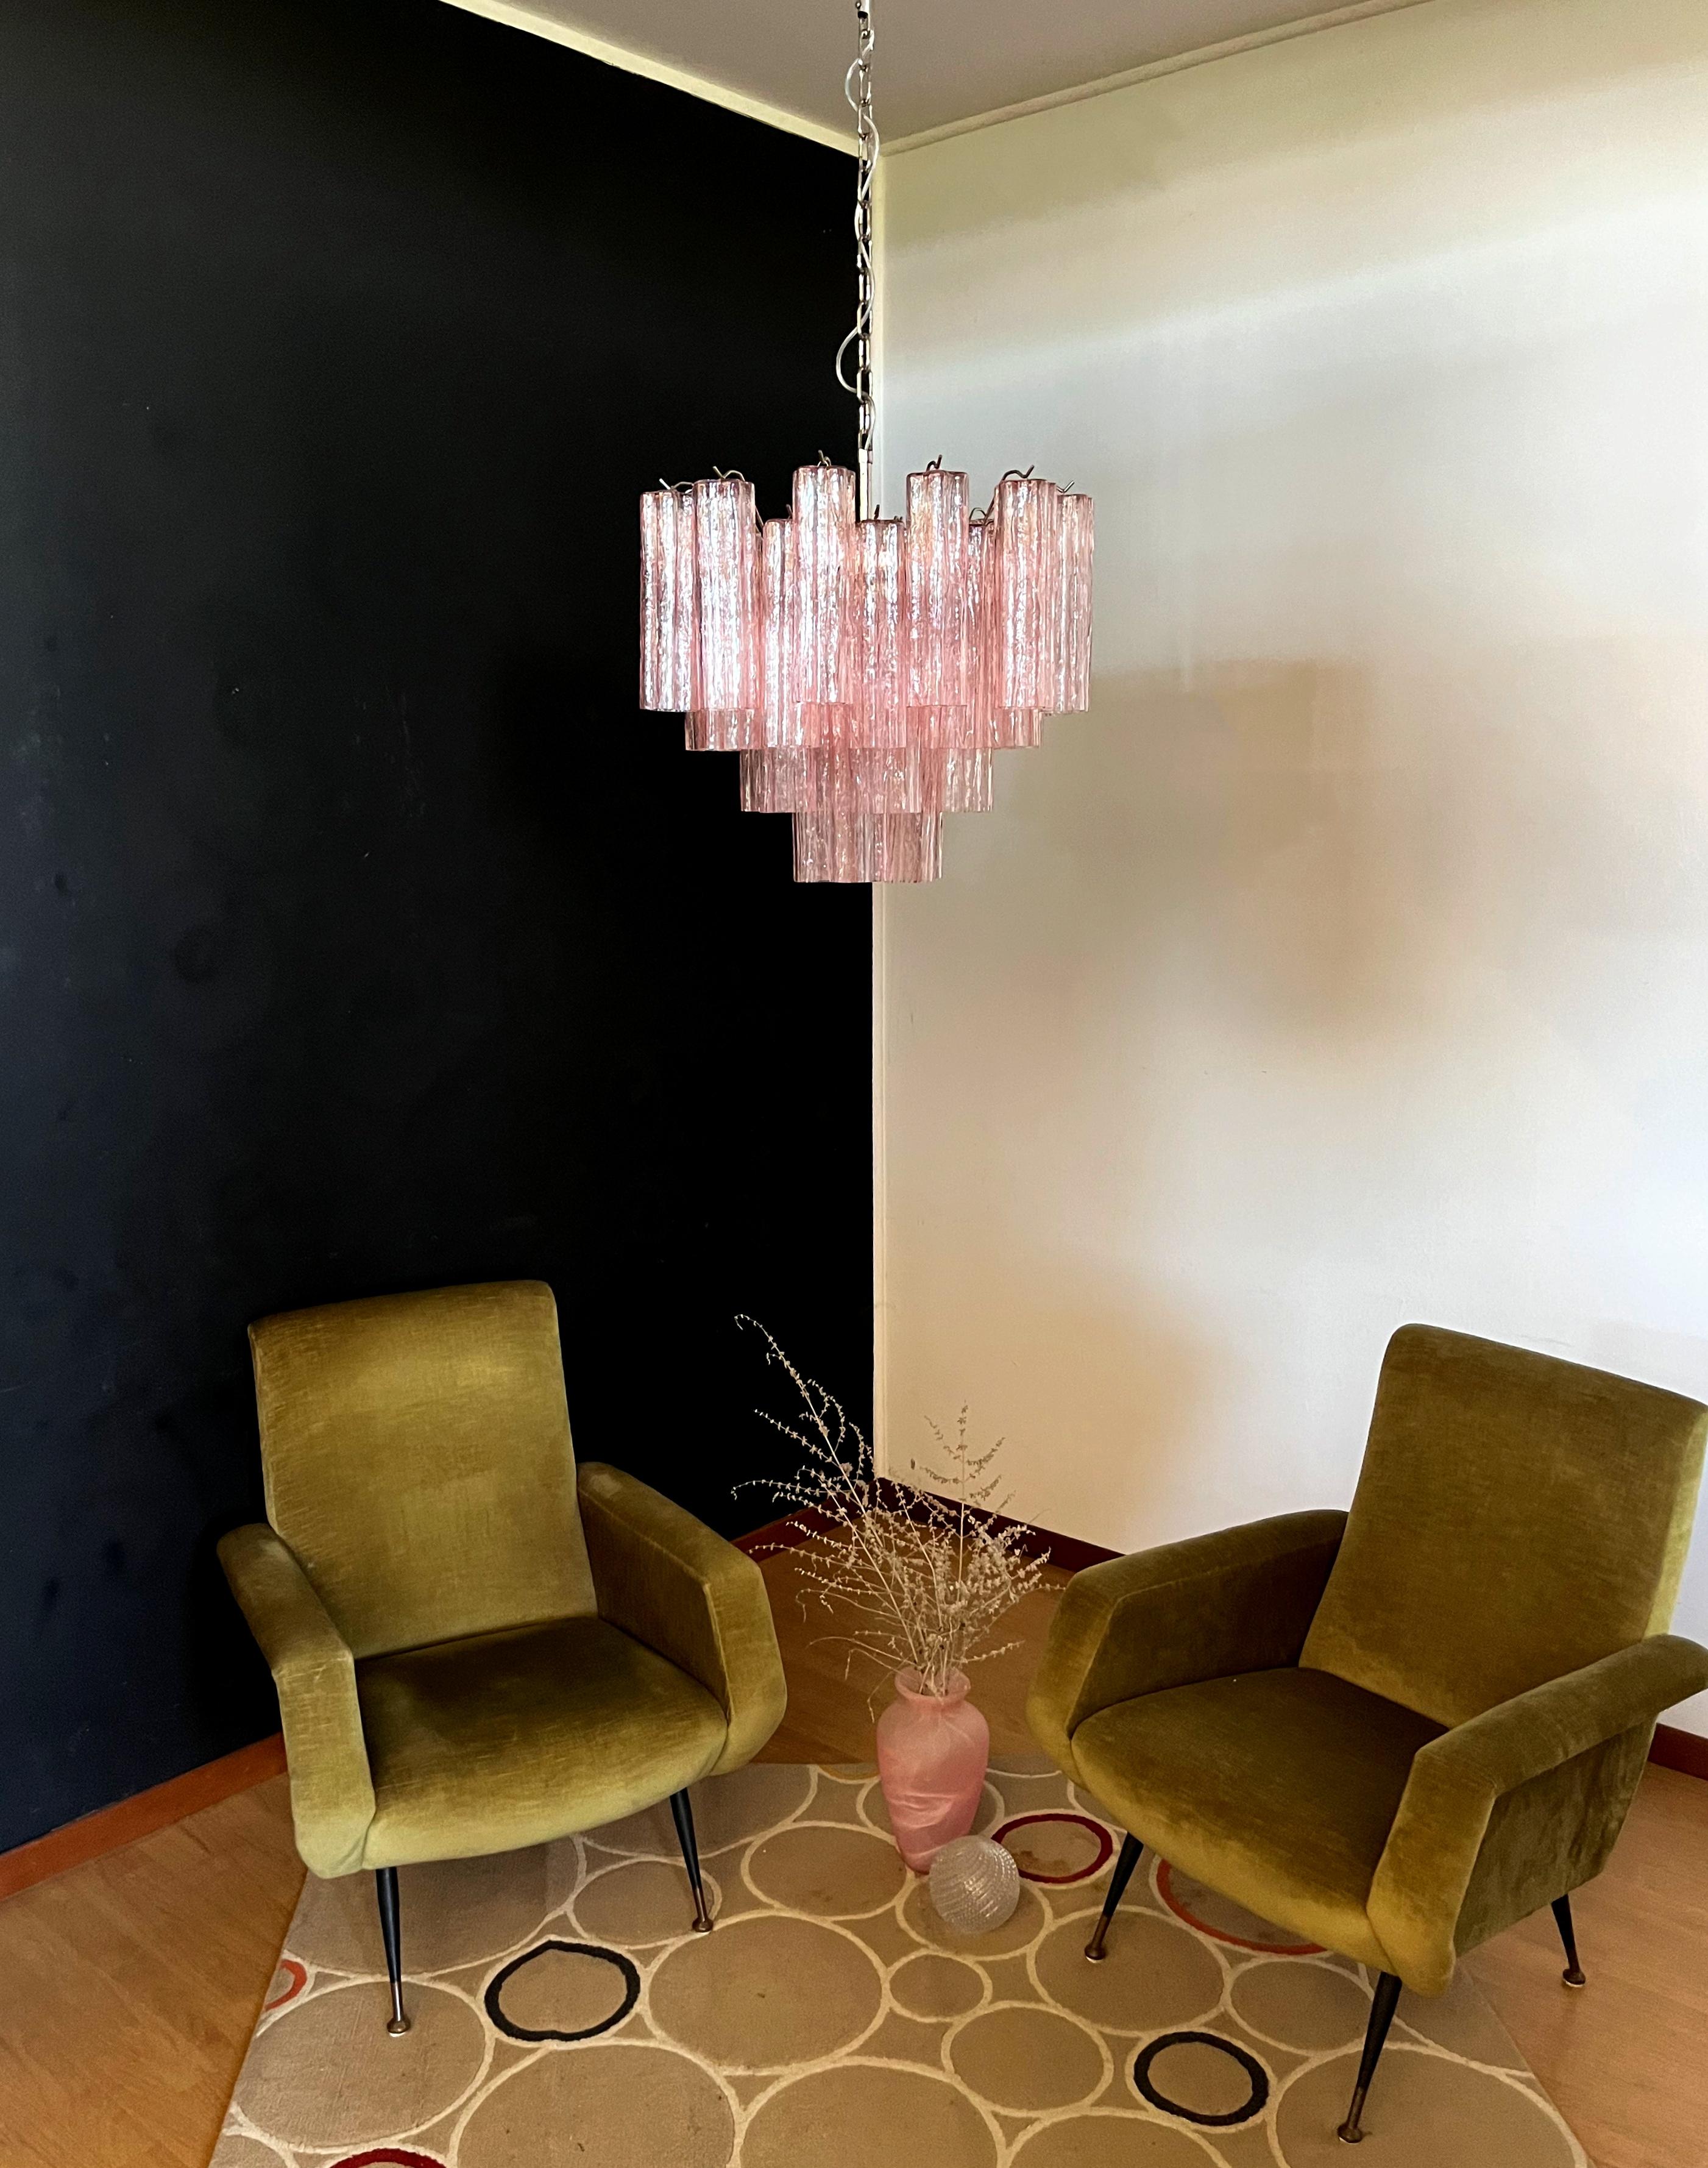 Italian vintage chandelier in Murano glass and nickel-plated metal structure. The armor polished nickel supports 36 large pink glass tubes in a star shape.
Period: late XX century
Dimensions: 	45,30 inches (115 cm) height with chain; 19,70 inches